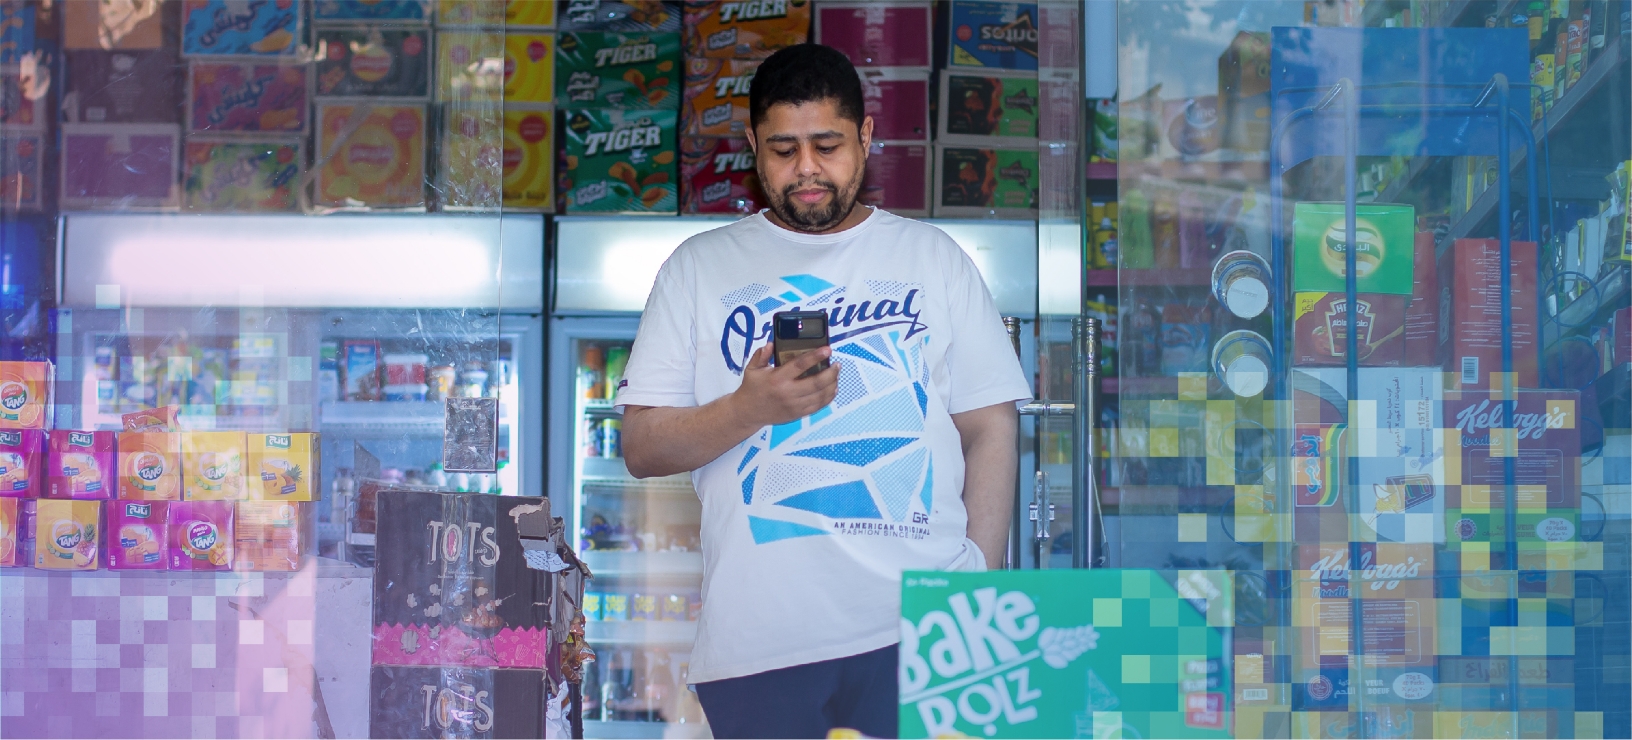 shopkeeper standing in front of store holding phone